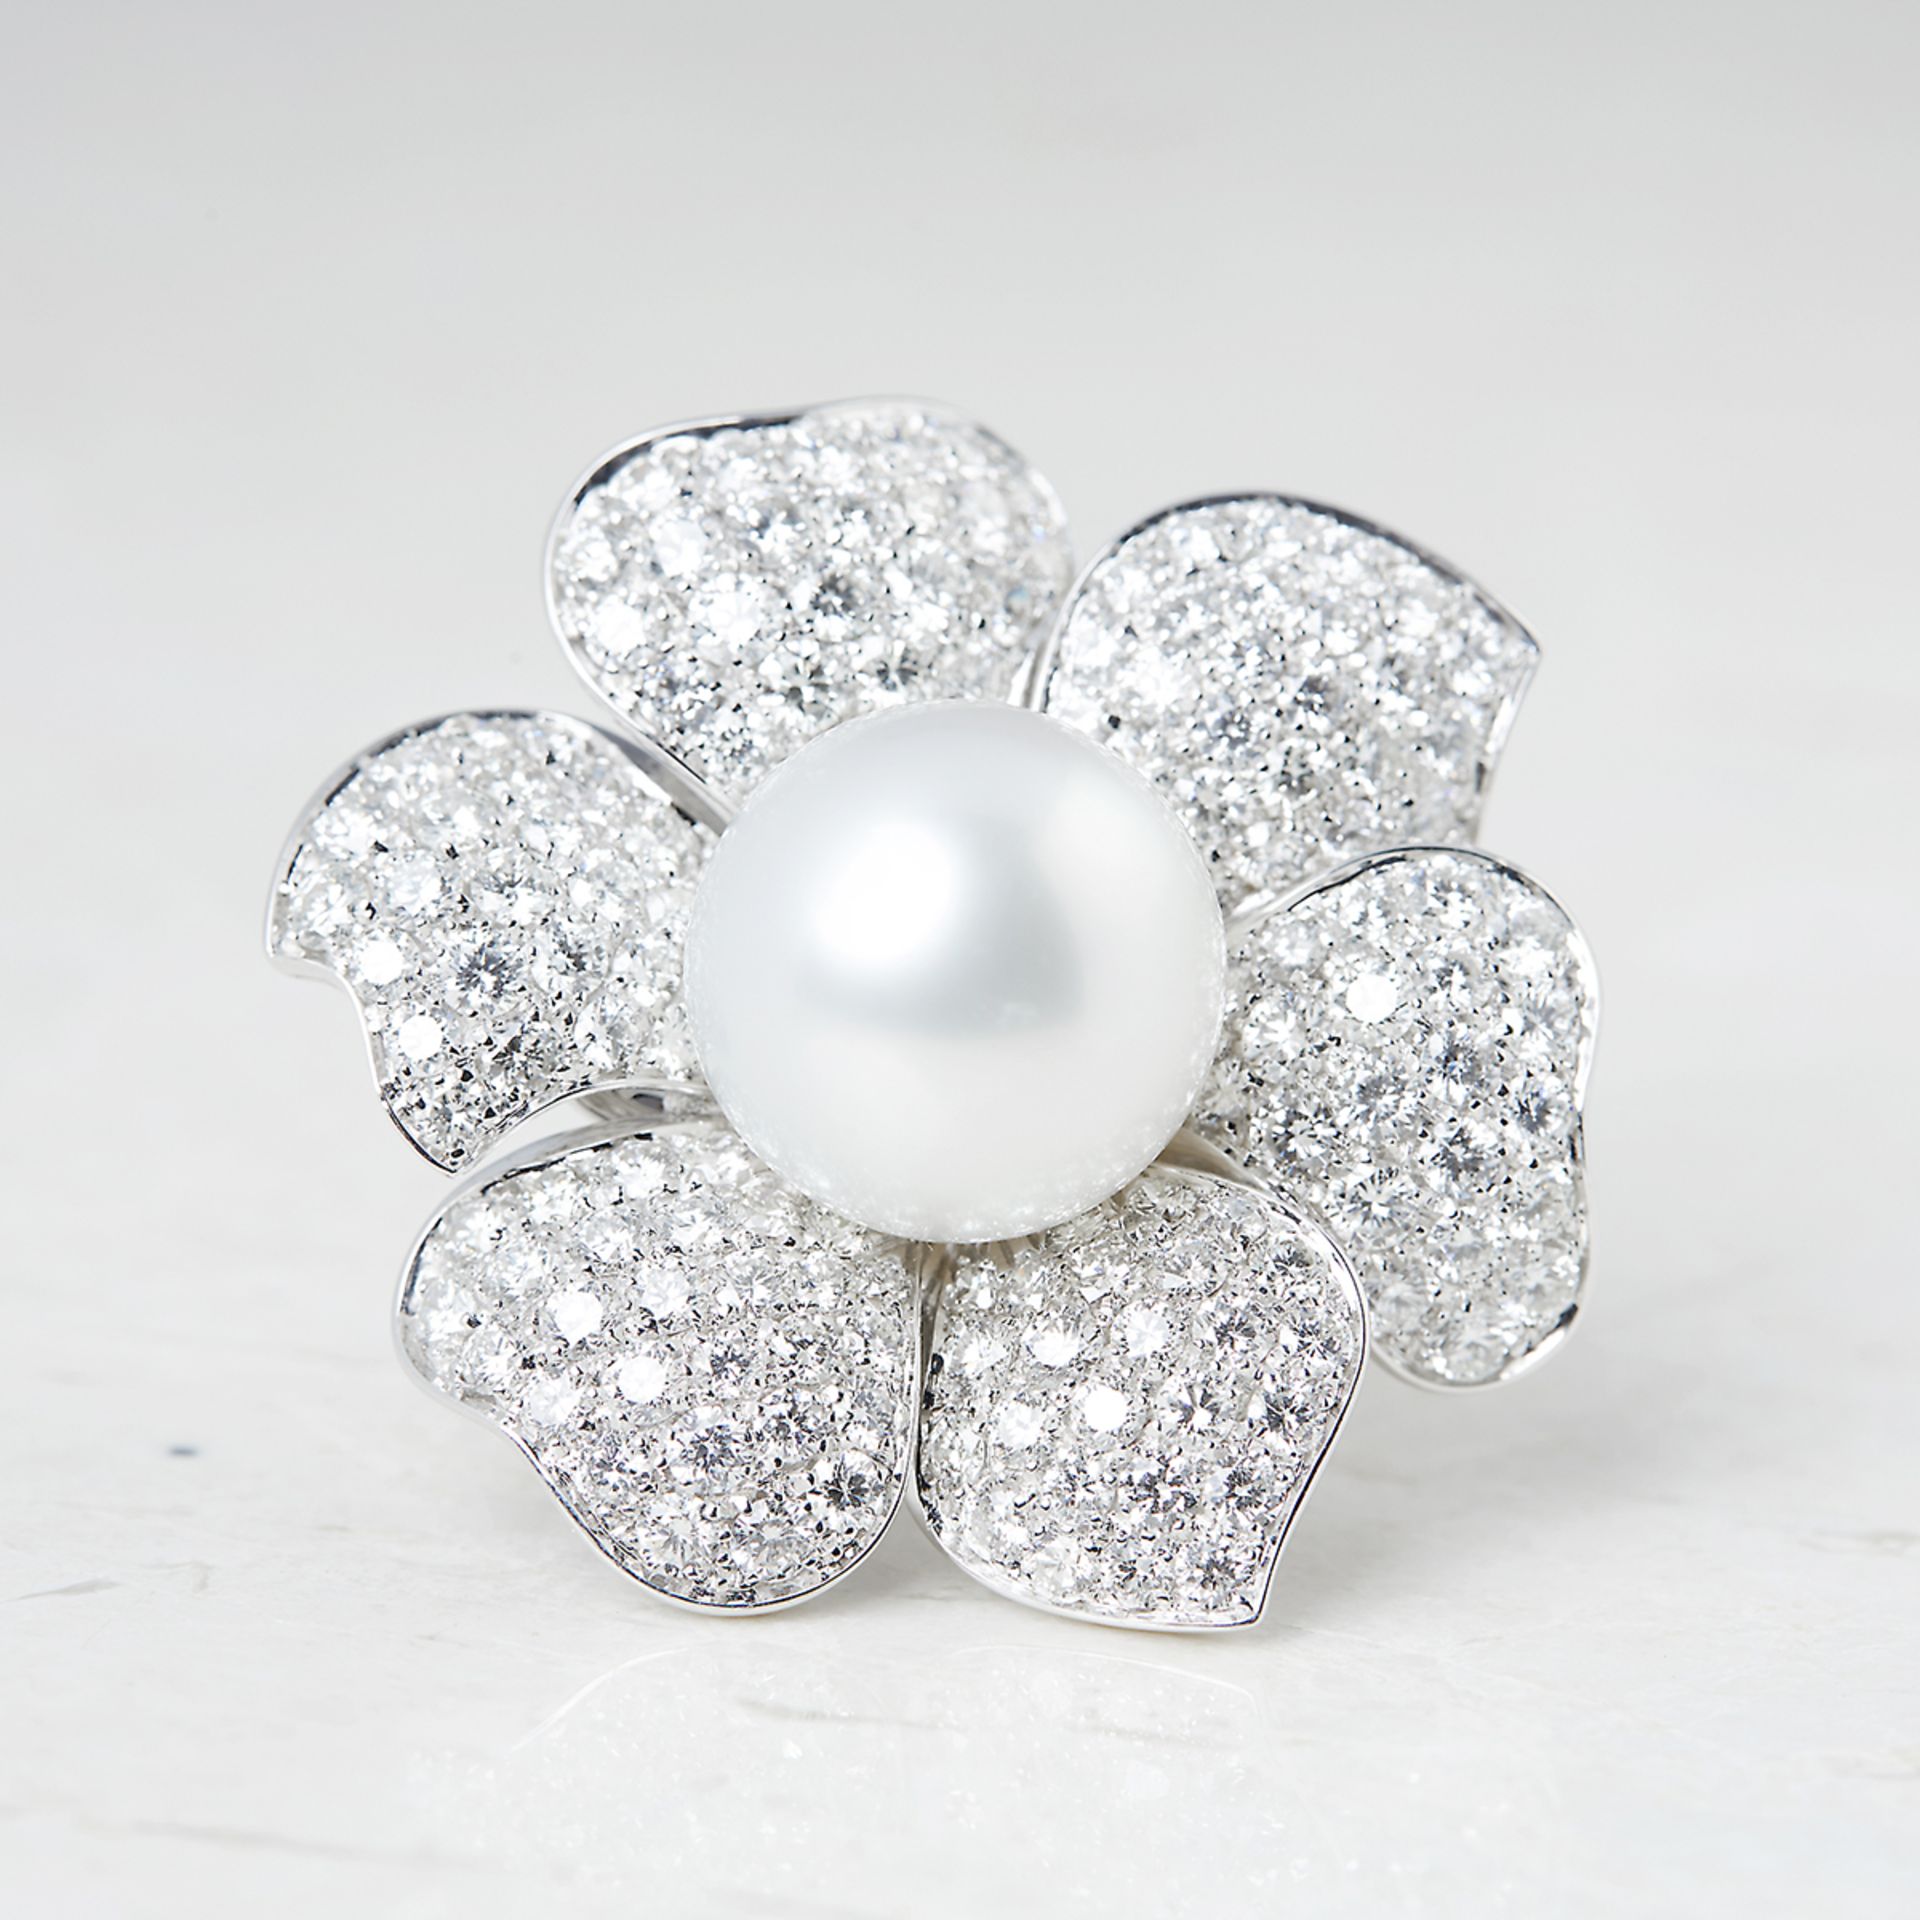 Picchiotti 18k White Gold South Sea Pearl & 7.80ct Diamond Flower Ring - Image 2 of 5